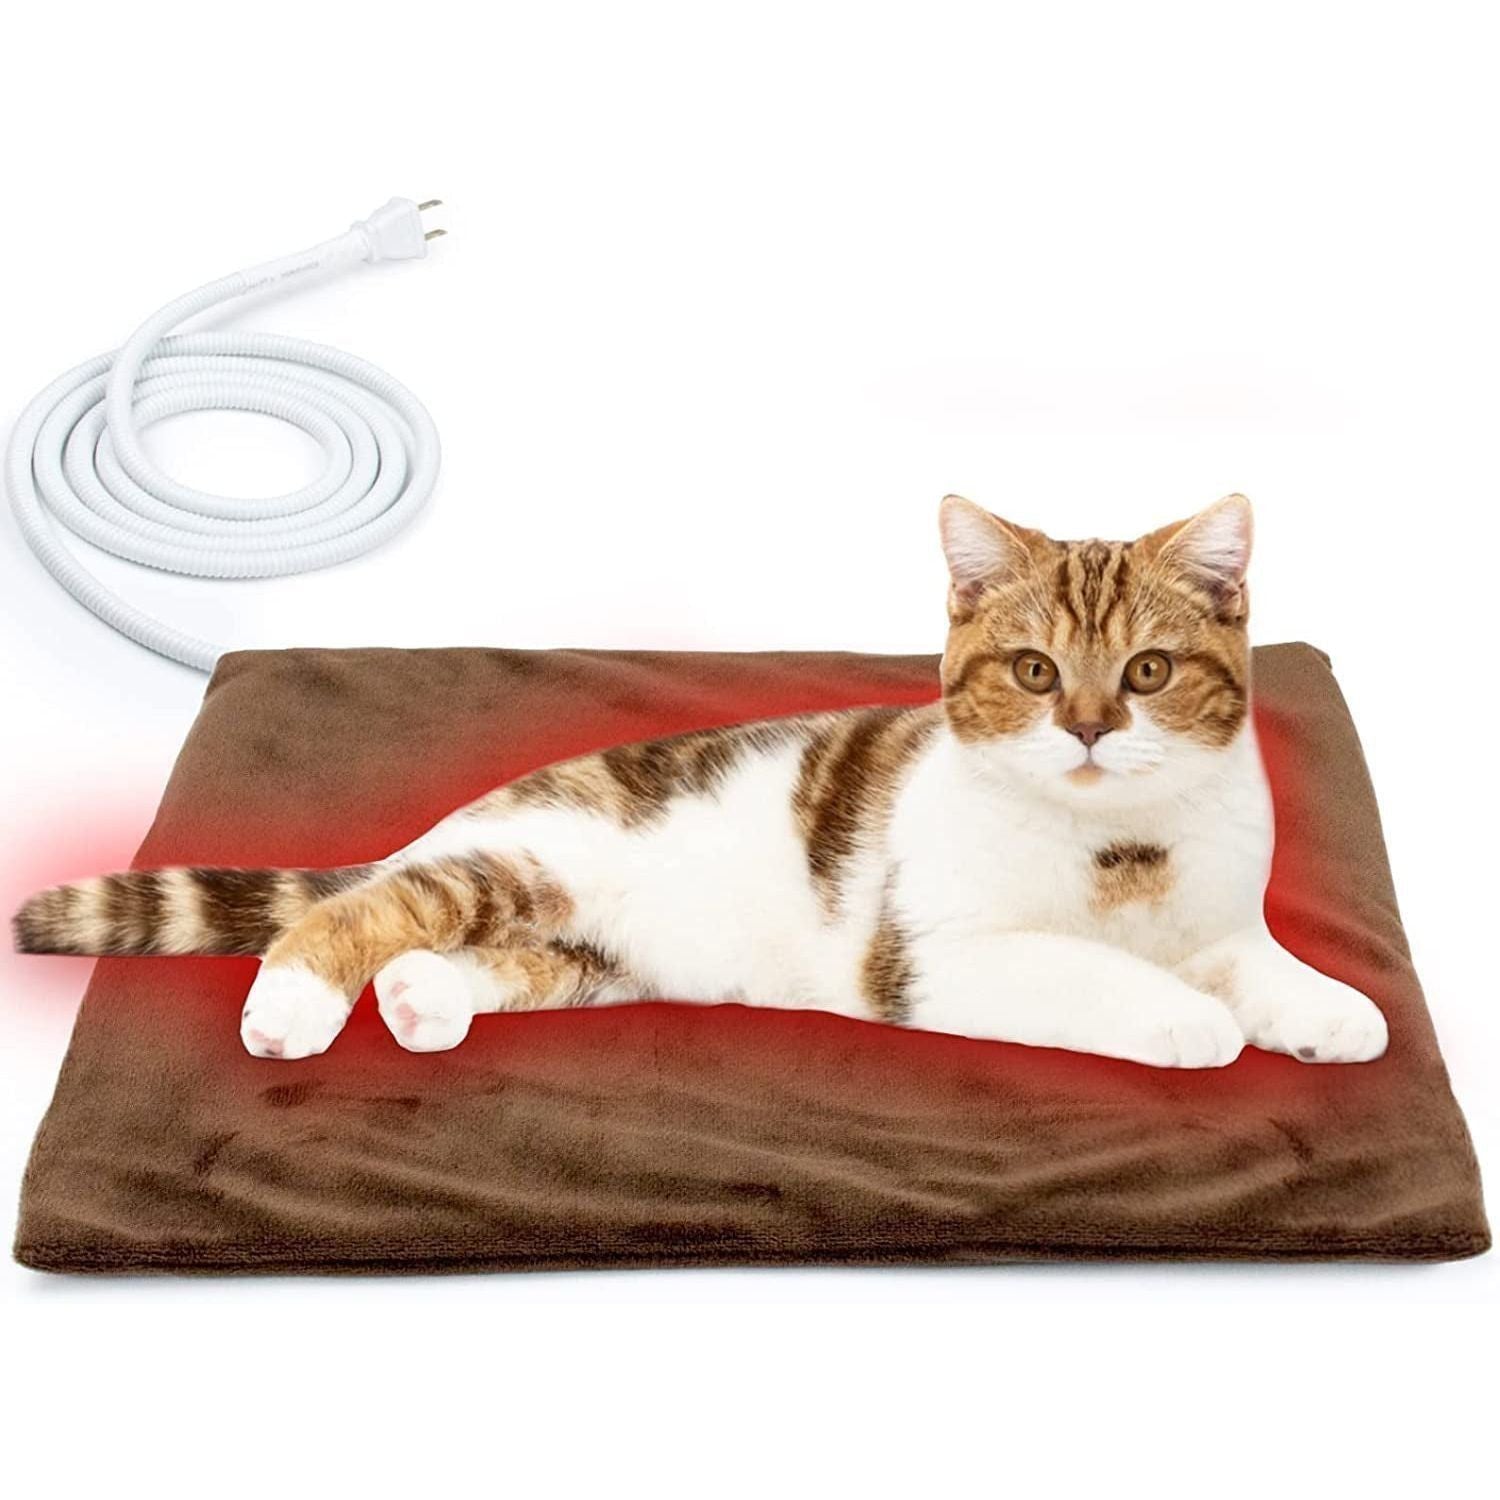 Pet Heating Pad, Safe Electric Heating Pad for Dogs and Cats Indoor Warming Pad with Auto Constant Temperature